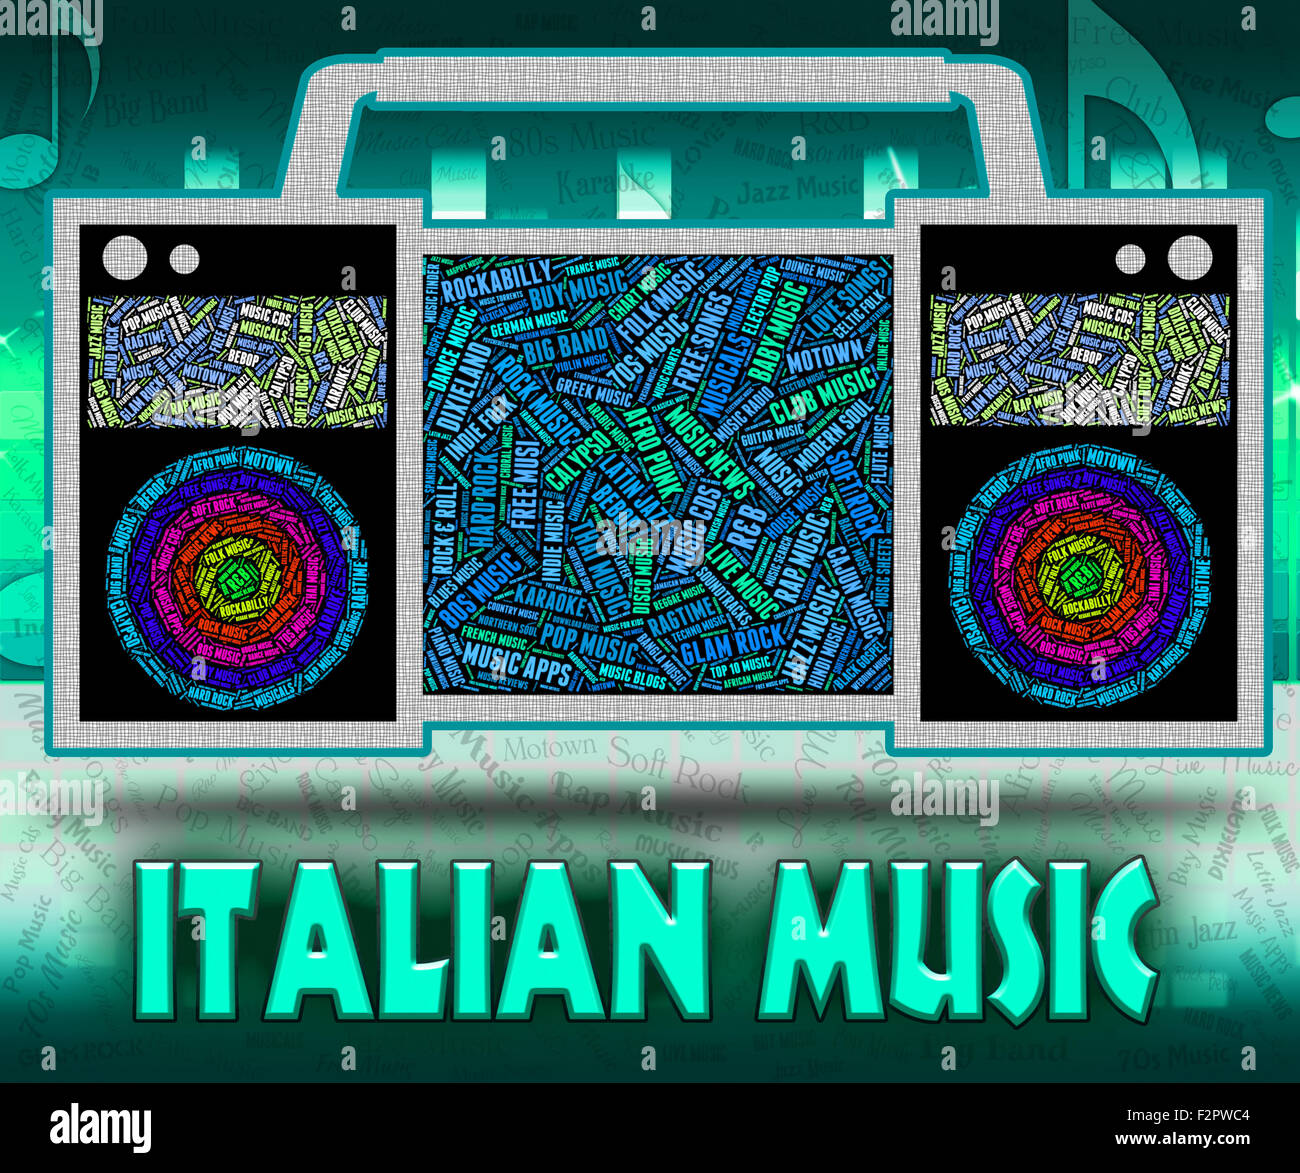 Italian Music Meaning Sound Tracks And Tune Stock Photo